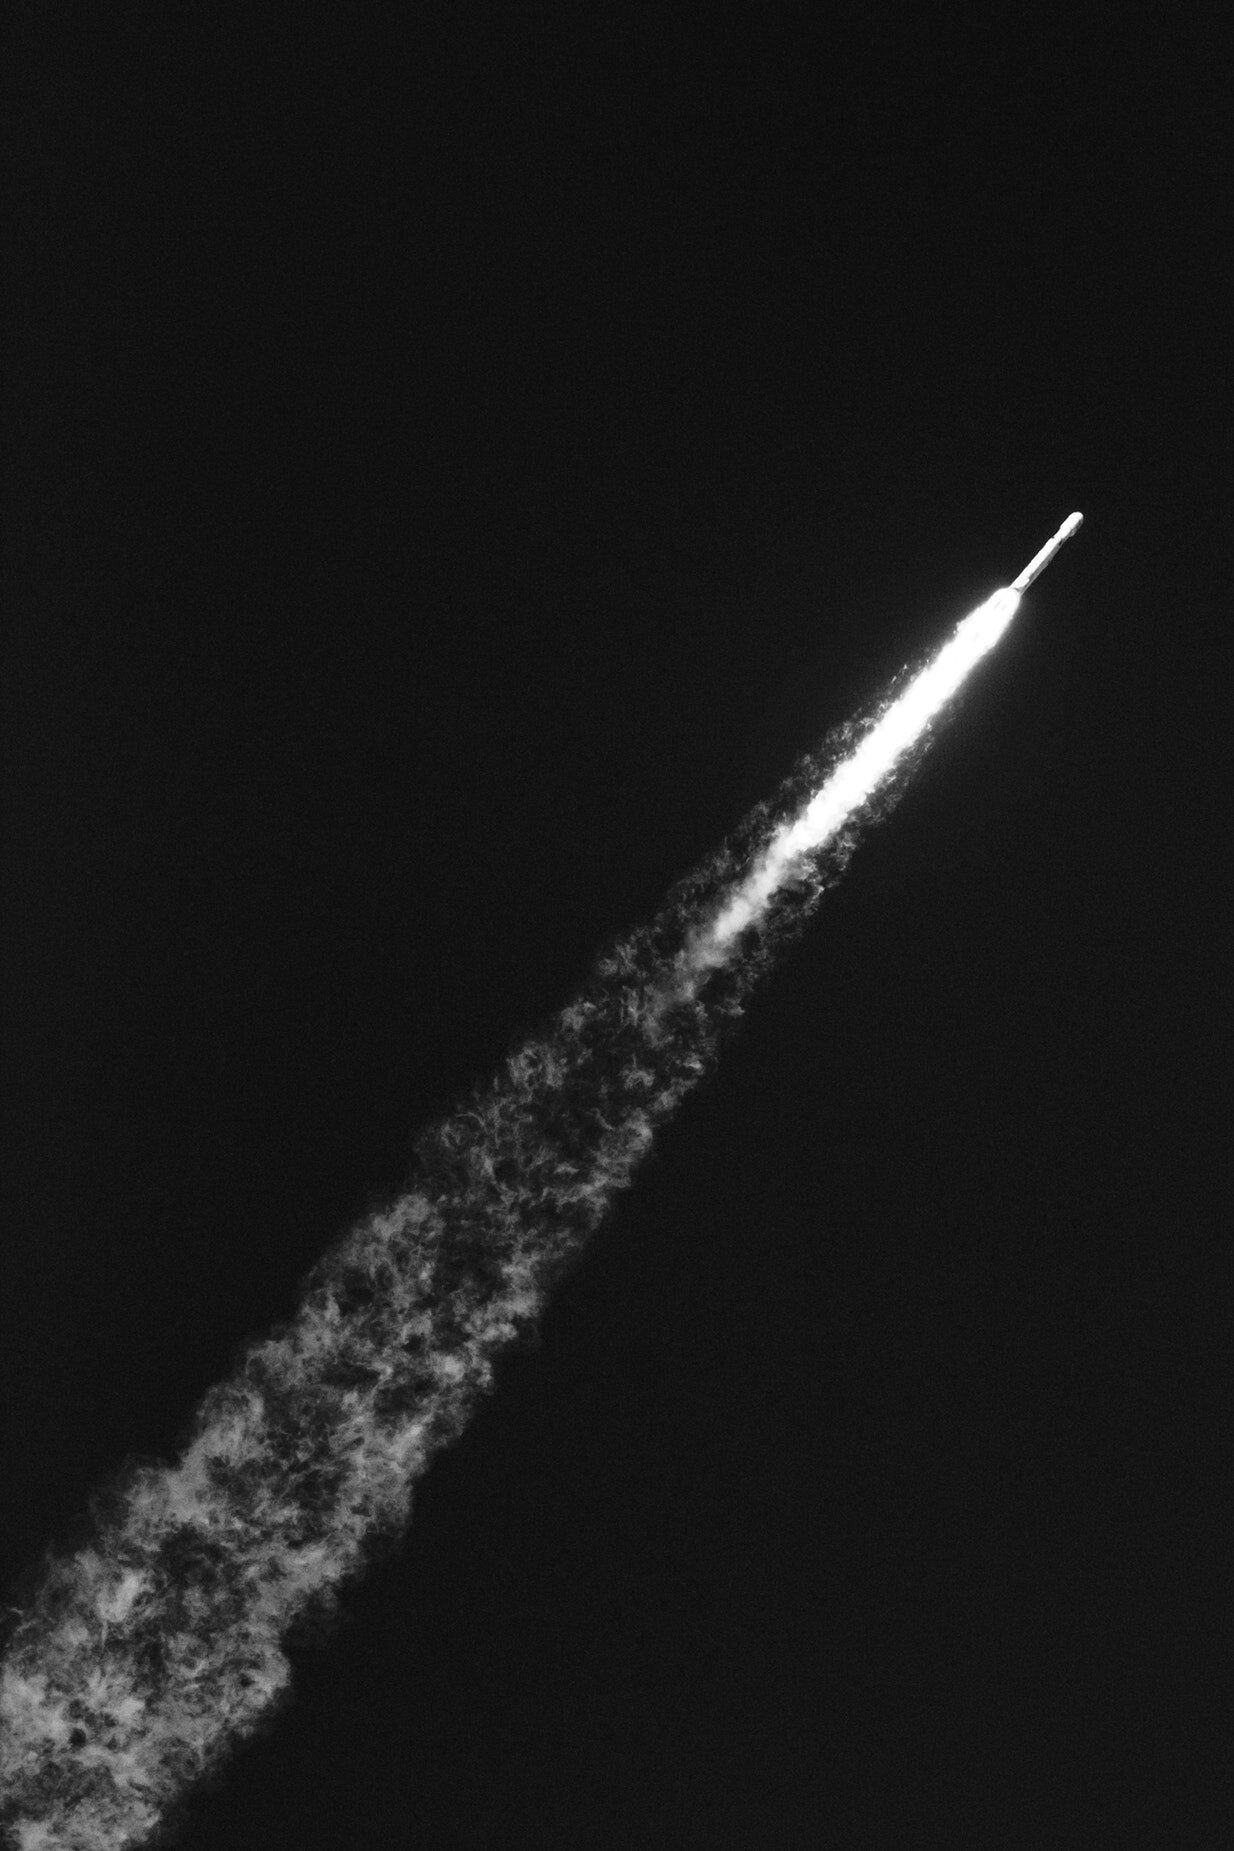 A rocket blasting into space